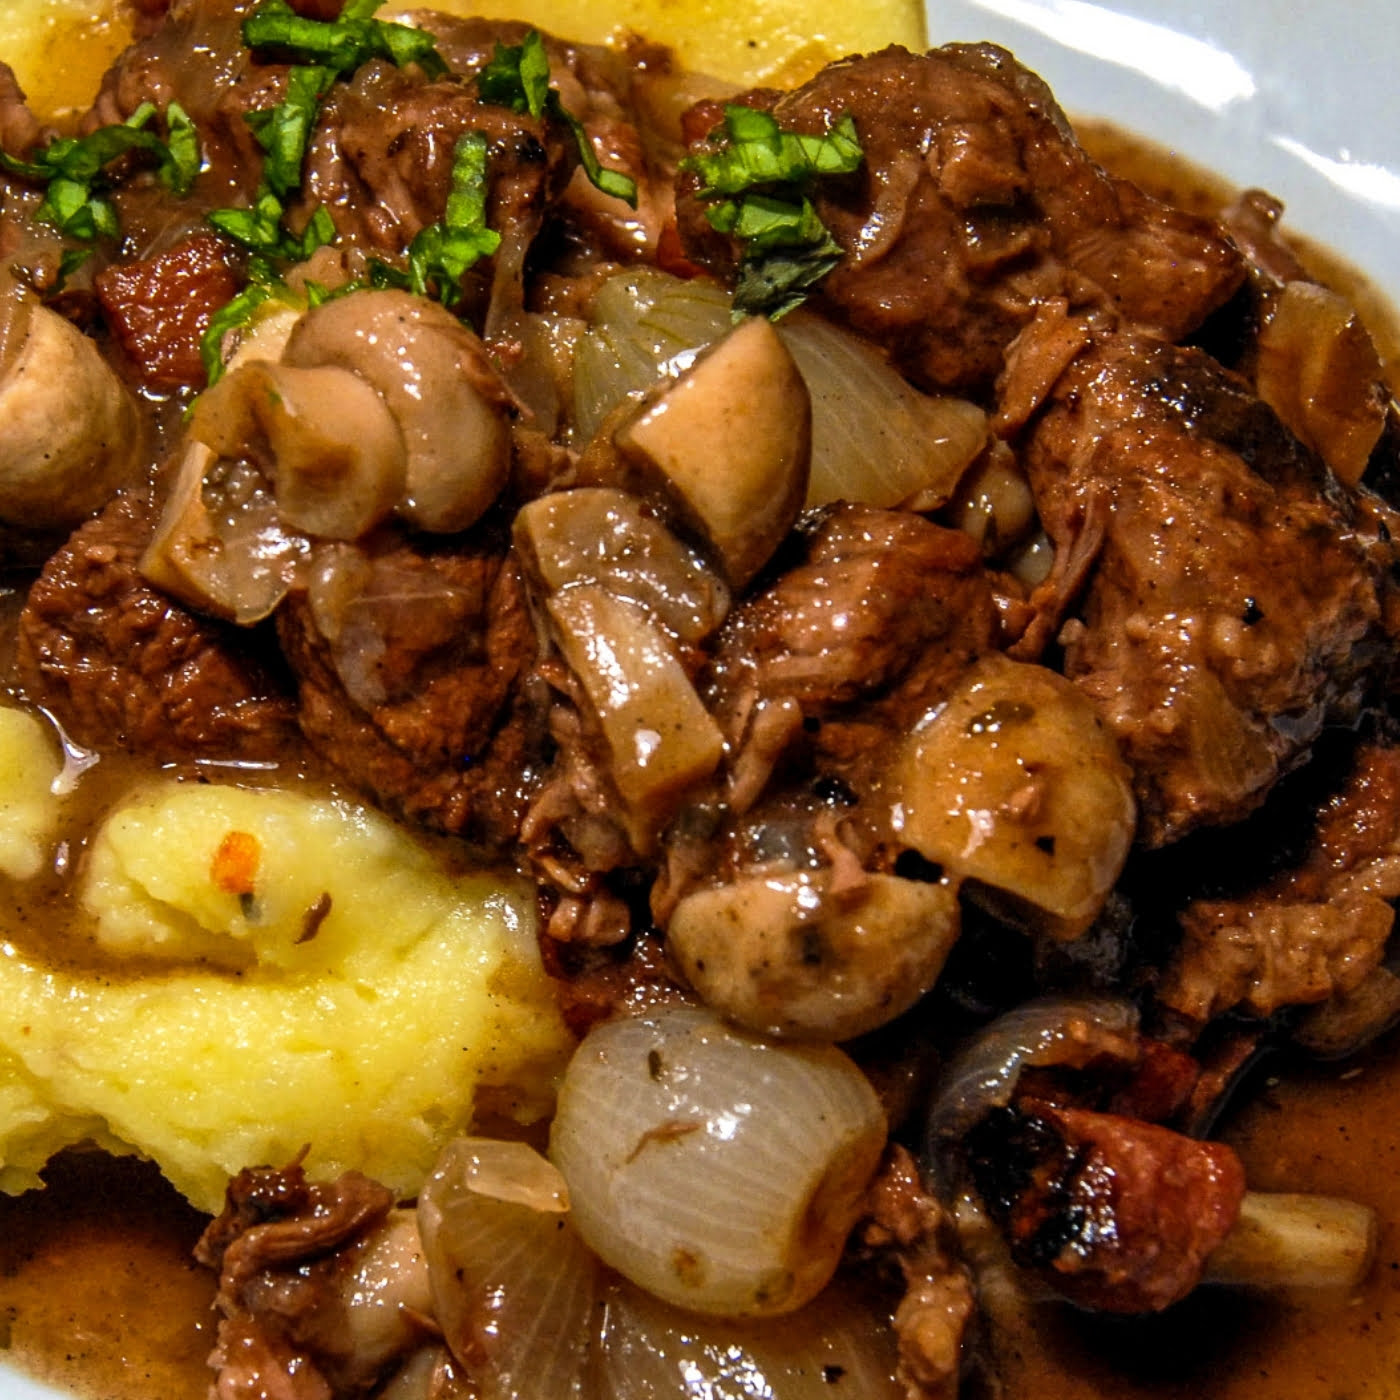 Beef Burgundy with mushrooms served with mashed potatoes